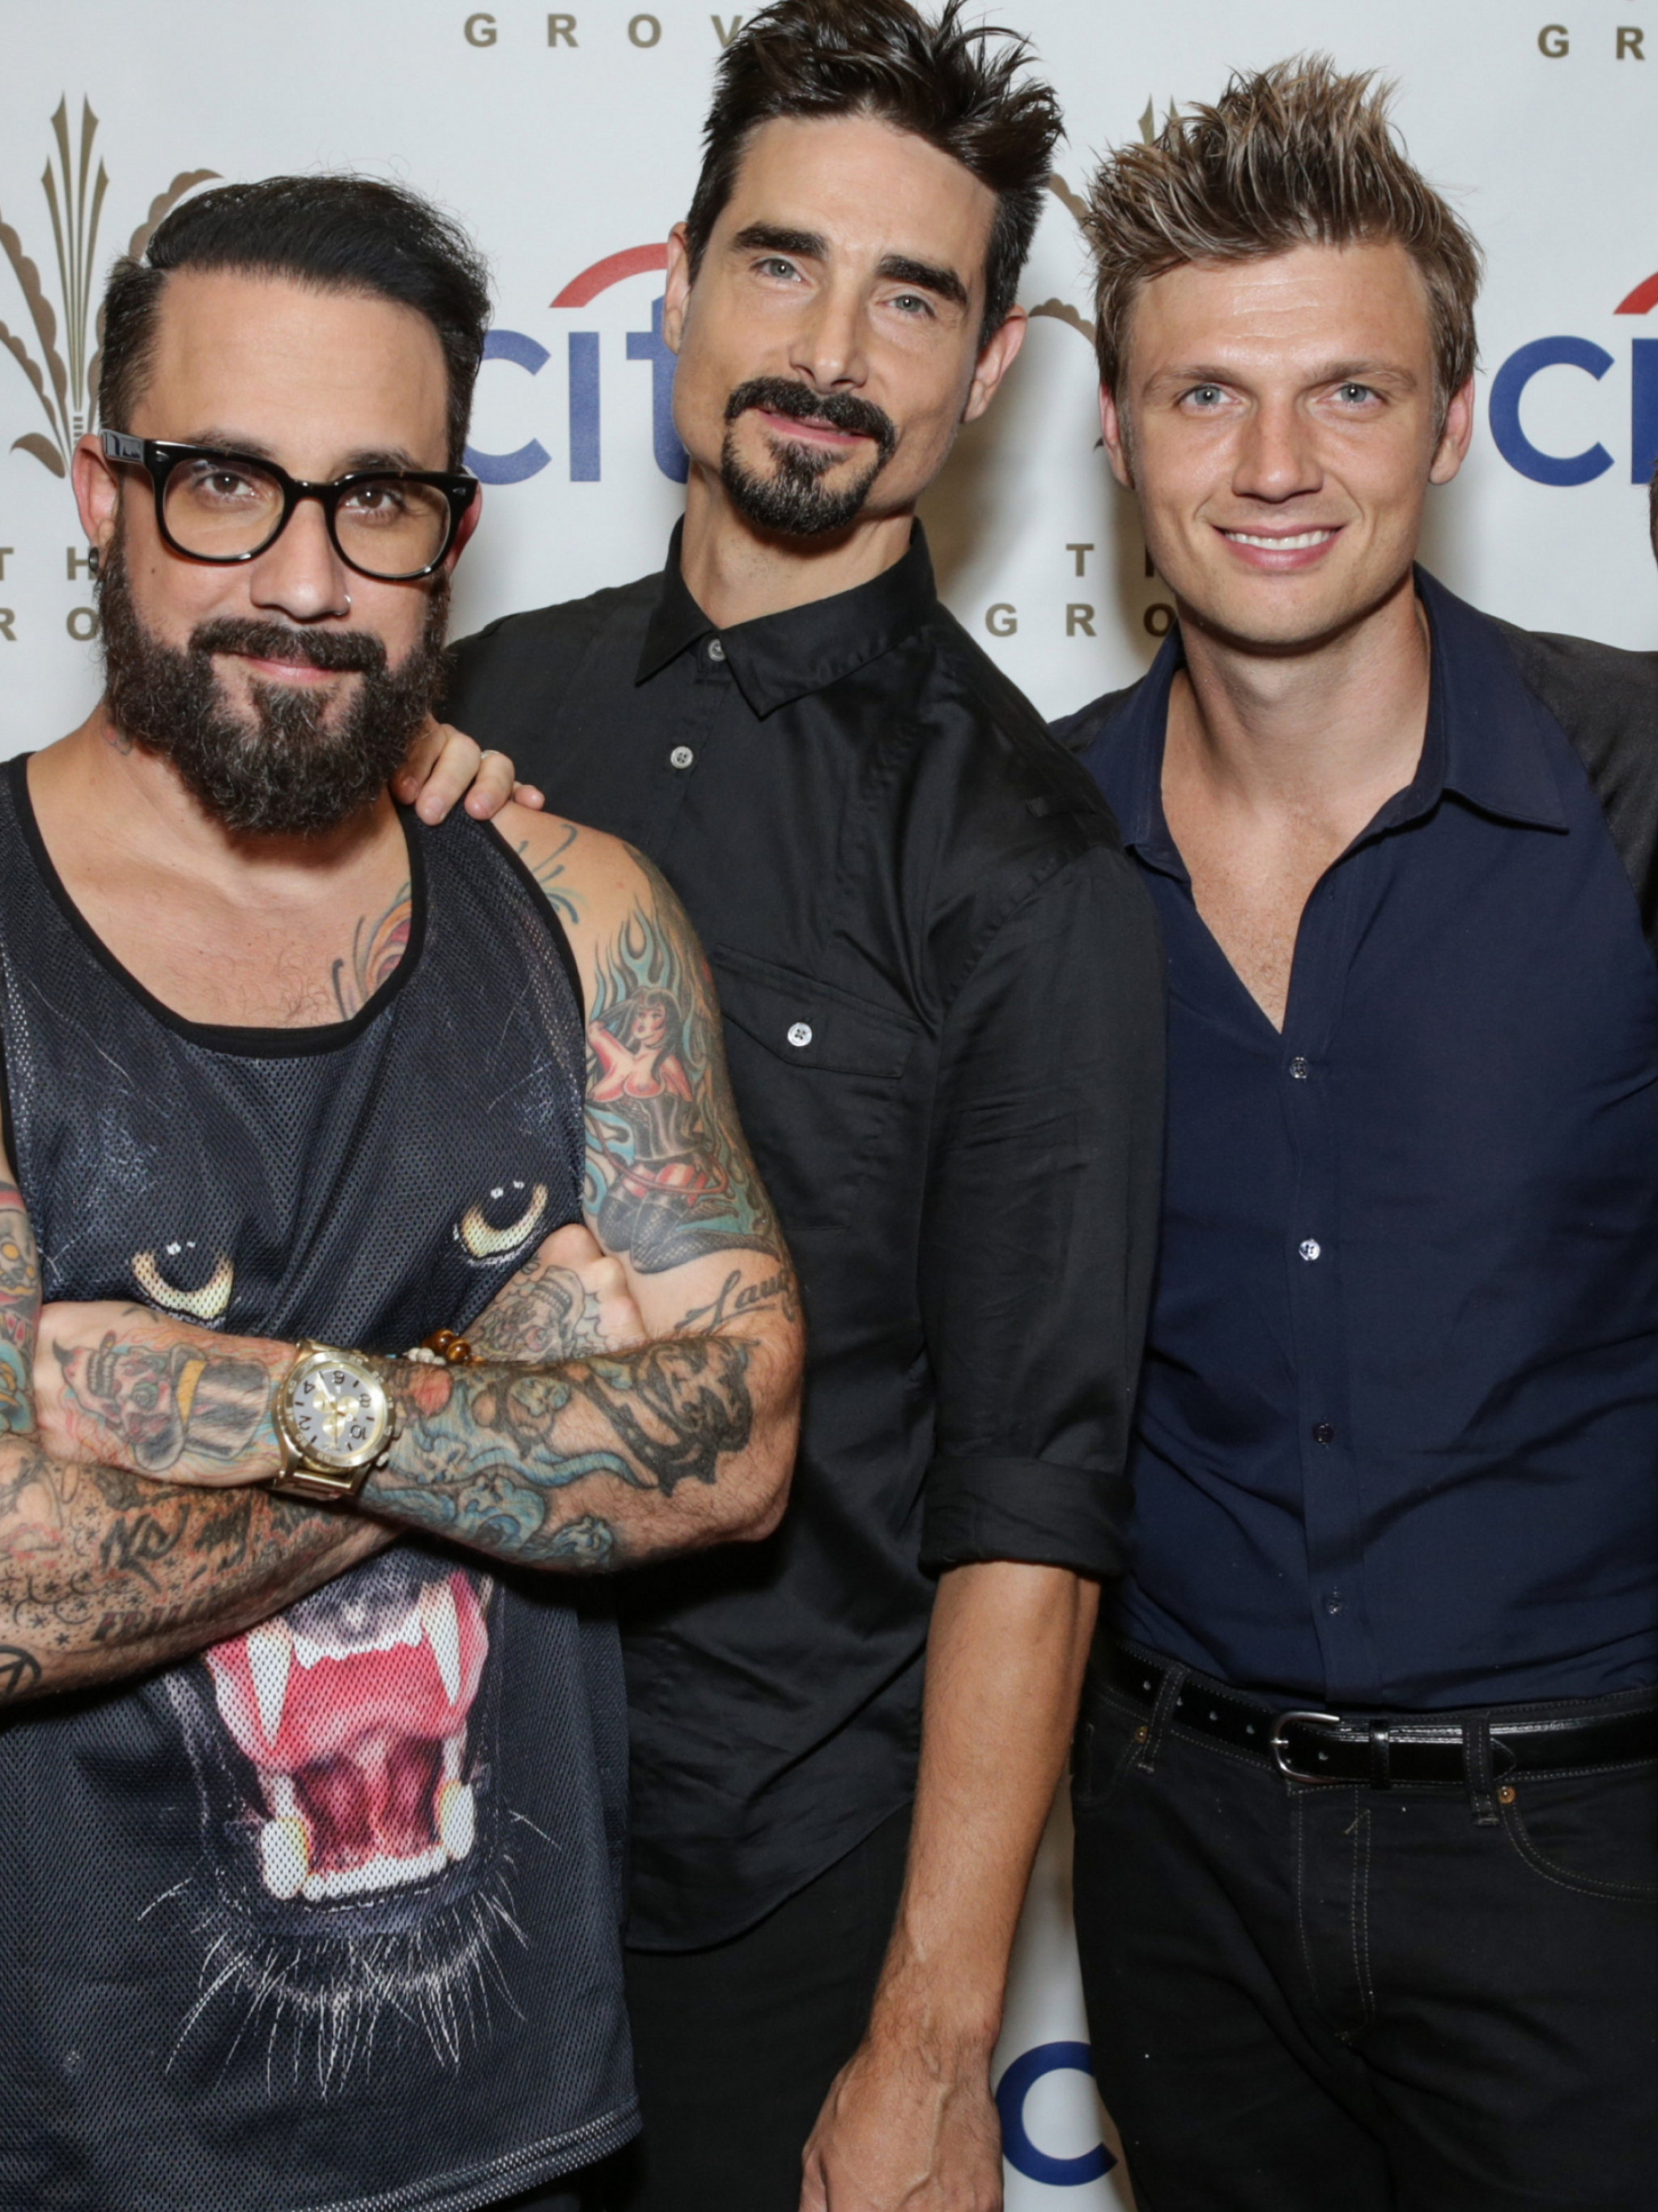 Backstreet Boys, Free download wallpapers, HD images, Music backgrounds, 2050x2740 HD Handy